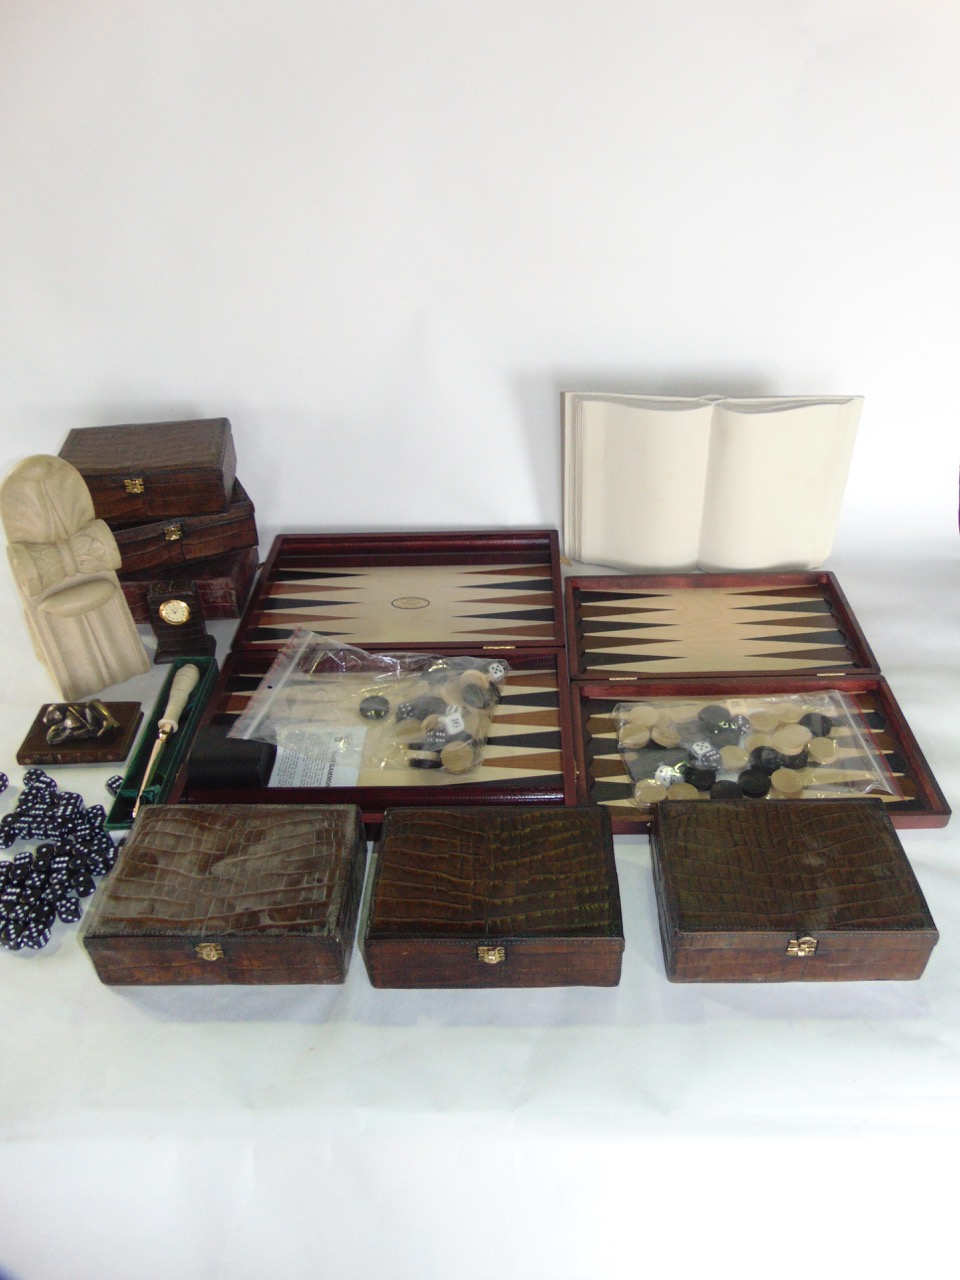 A collection of reproduction and replica antique gaming sets, together with faux leather boxes and